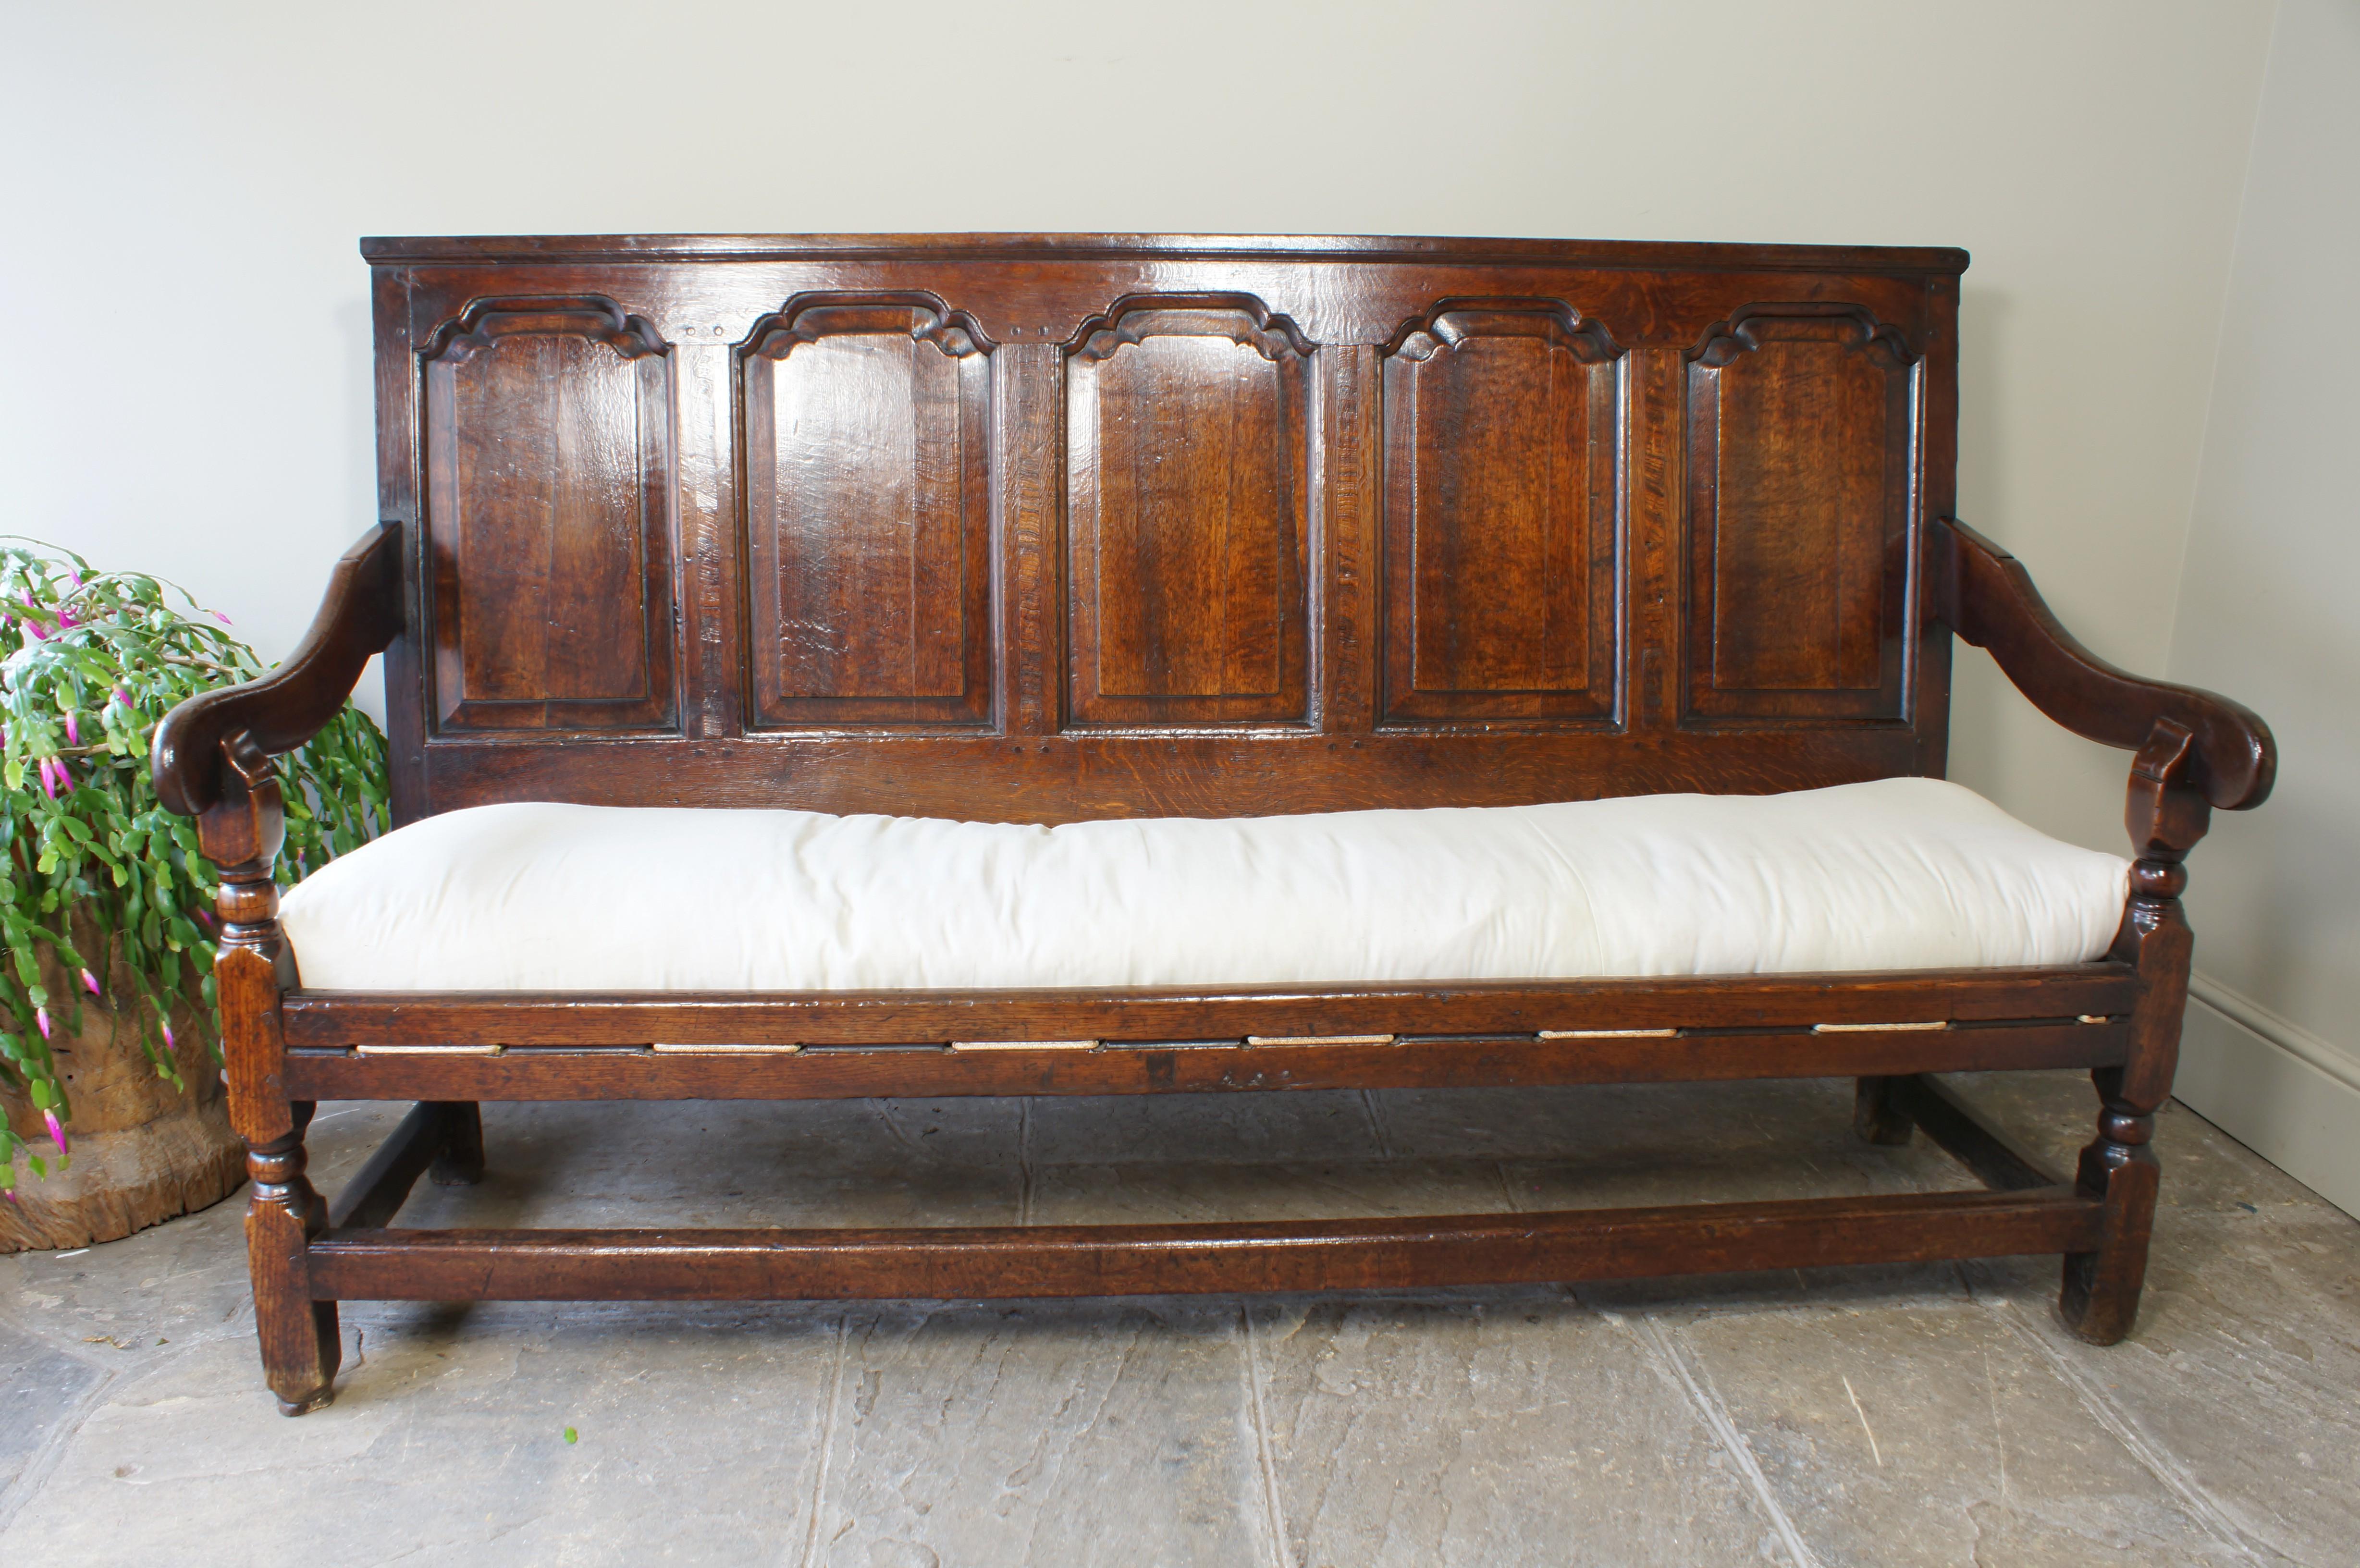 Hand-Crafted Early 18th Century Oak Settle. For Sale